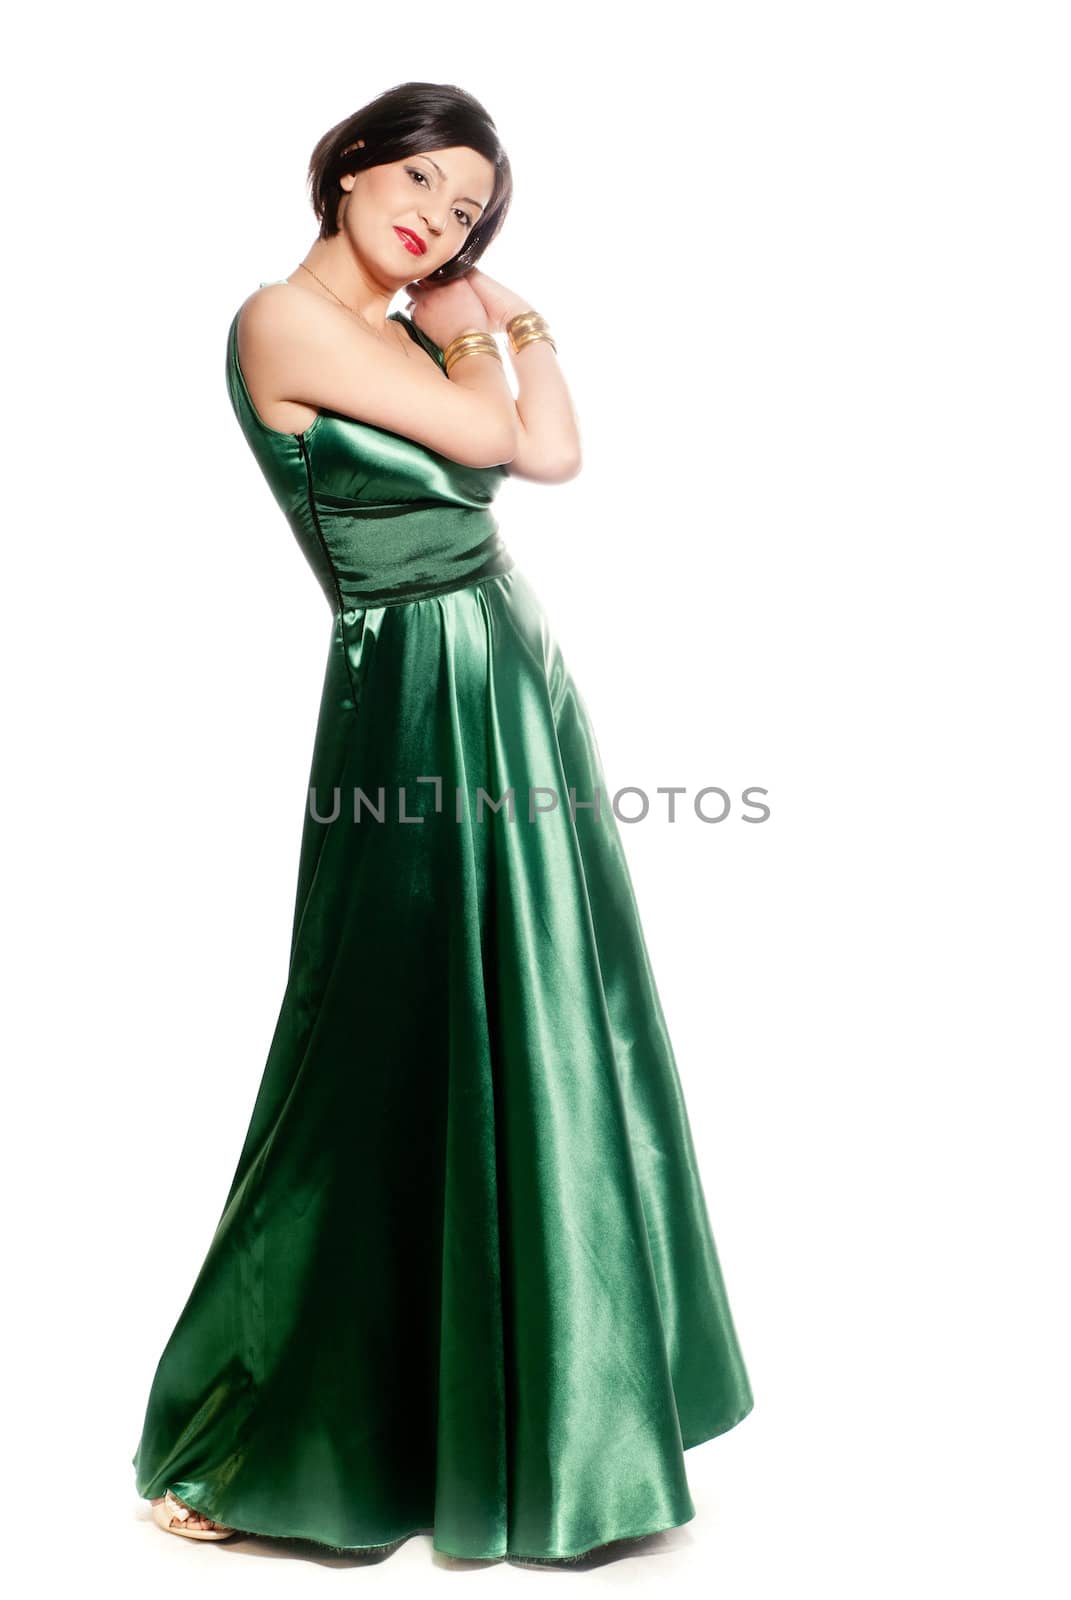 Lonh green dress on a young lady isolated on white